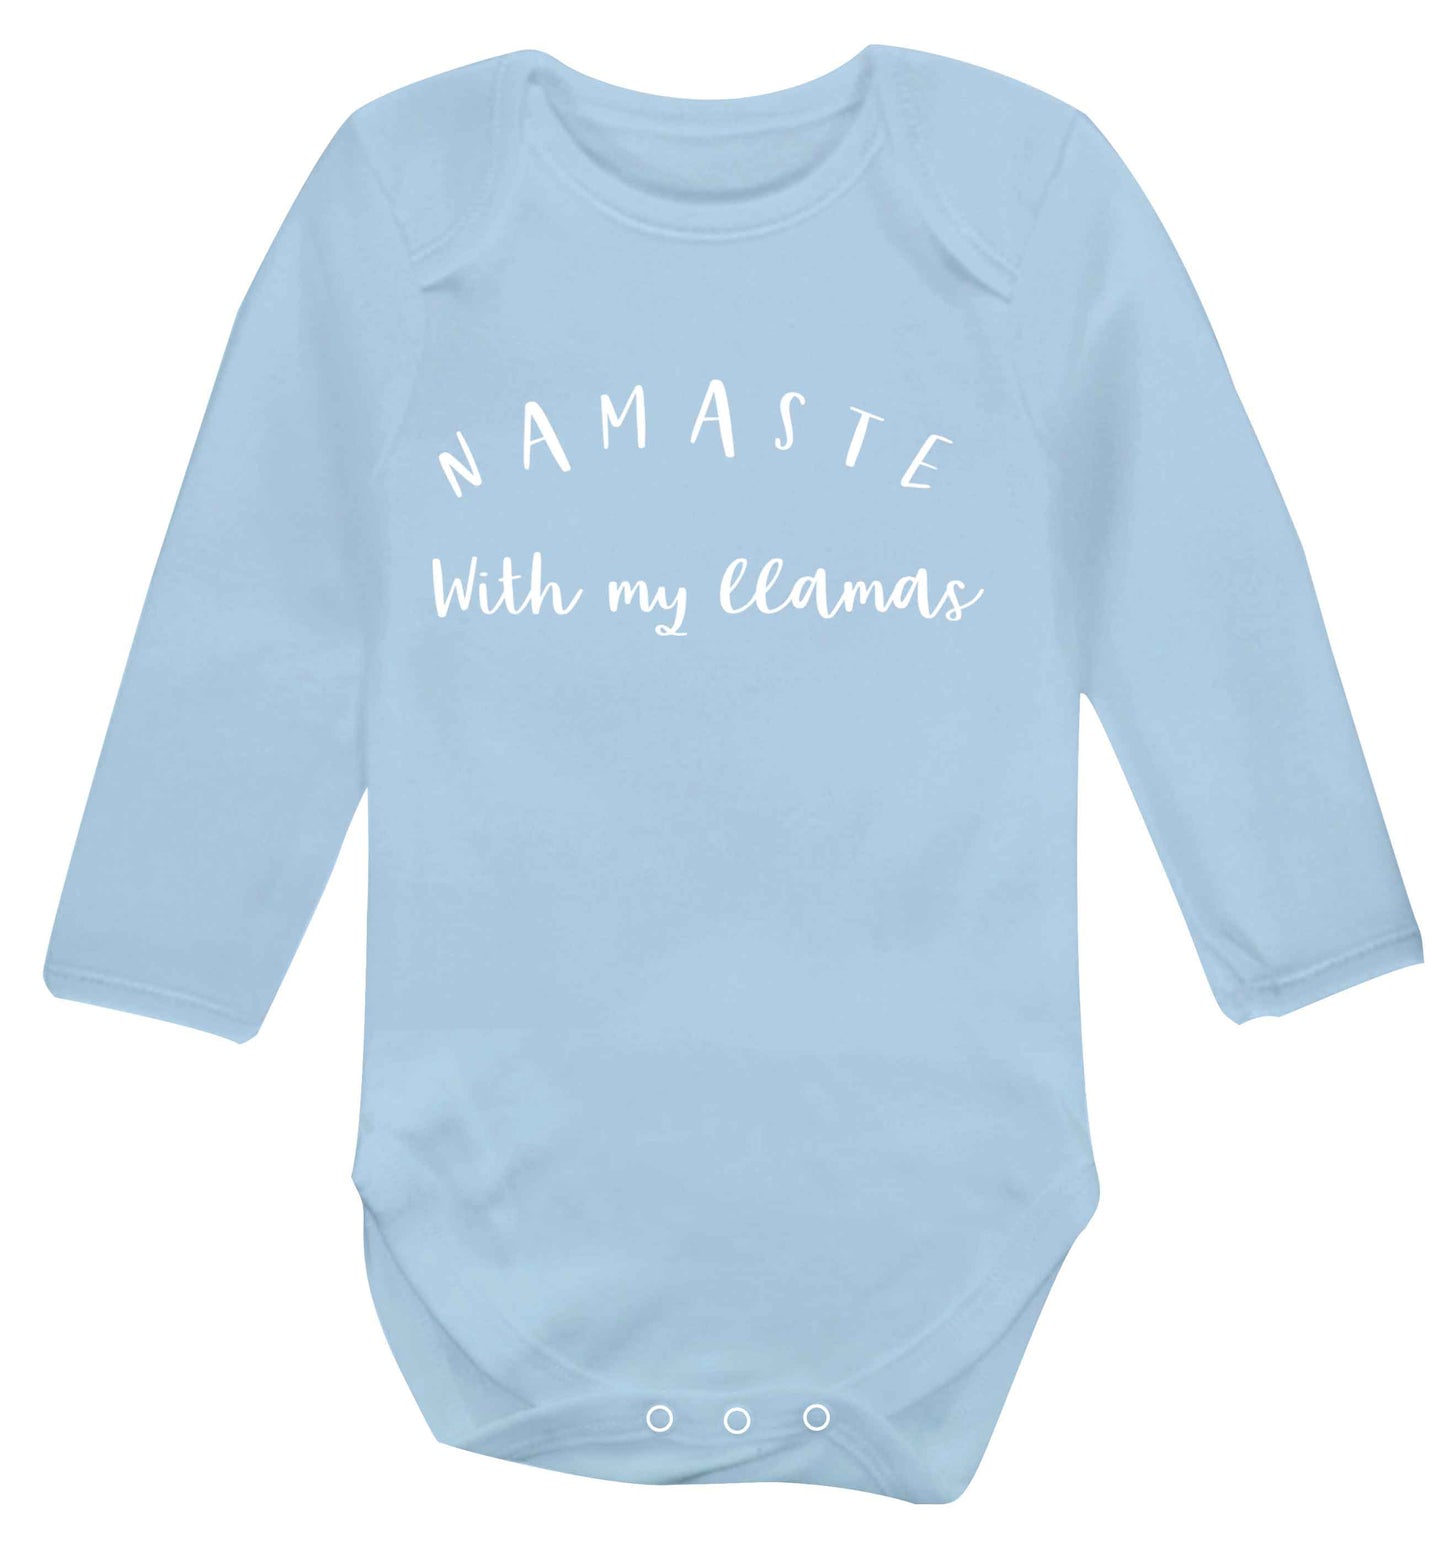 Namaste with my llamas Baby Vest long sleeved pale blue 6-12 months